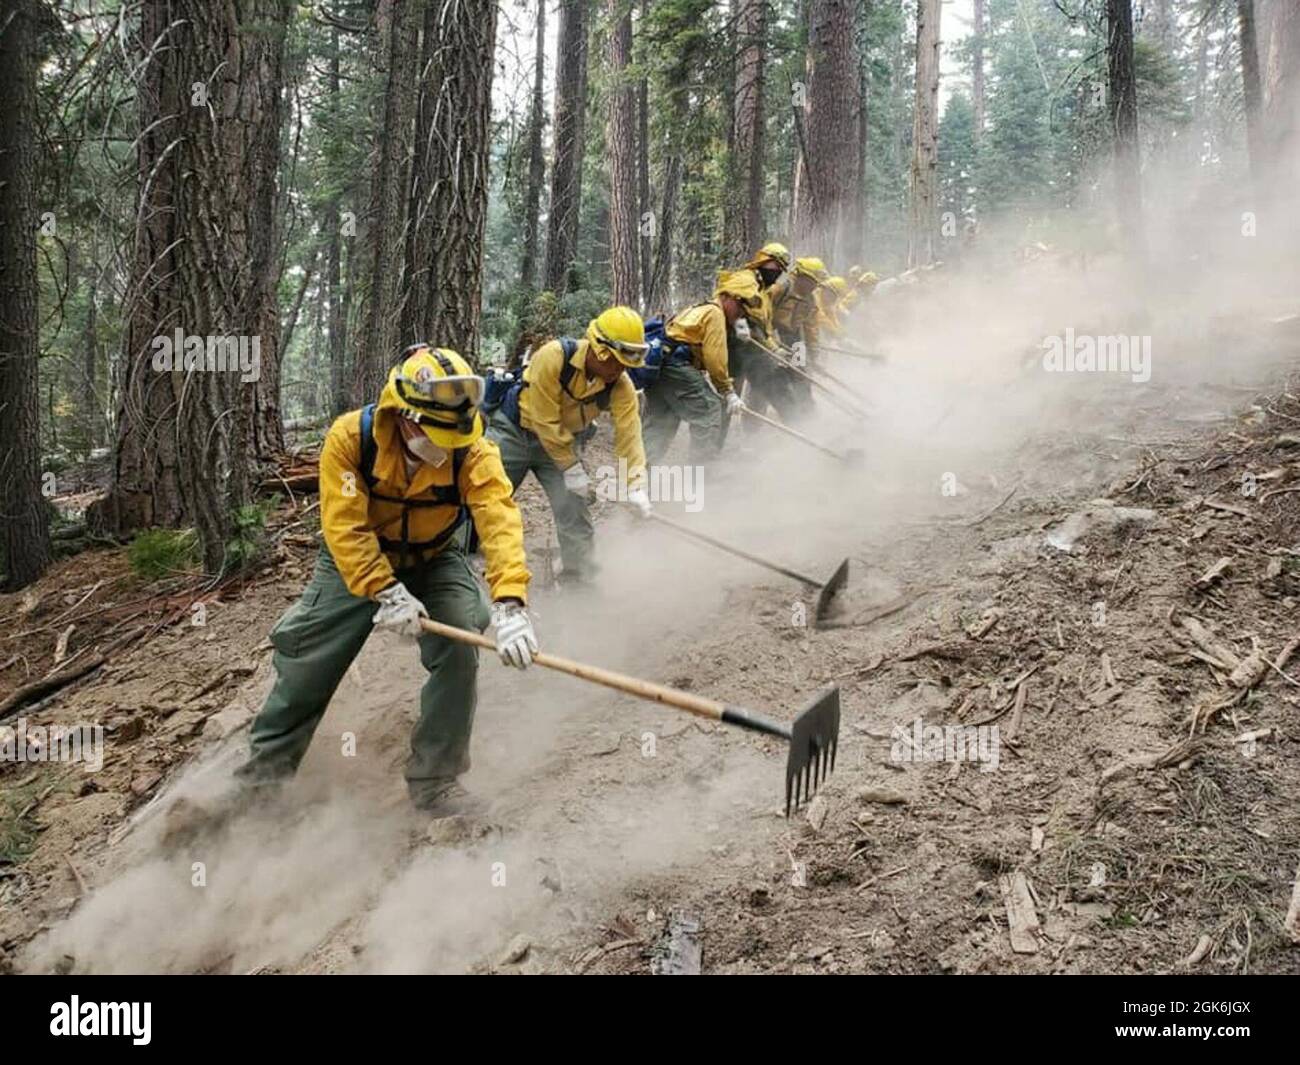 A handcrew from the California National Guard's Joint Task Force 578 fights the Dixie Fire as part of the mutual aid system in support of CAL FIRE, Aug. 16, 2021, in Northern California. Stock Photo